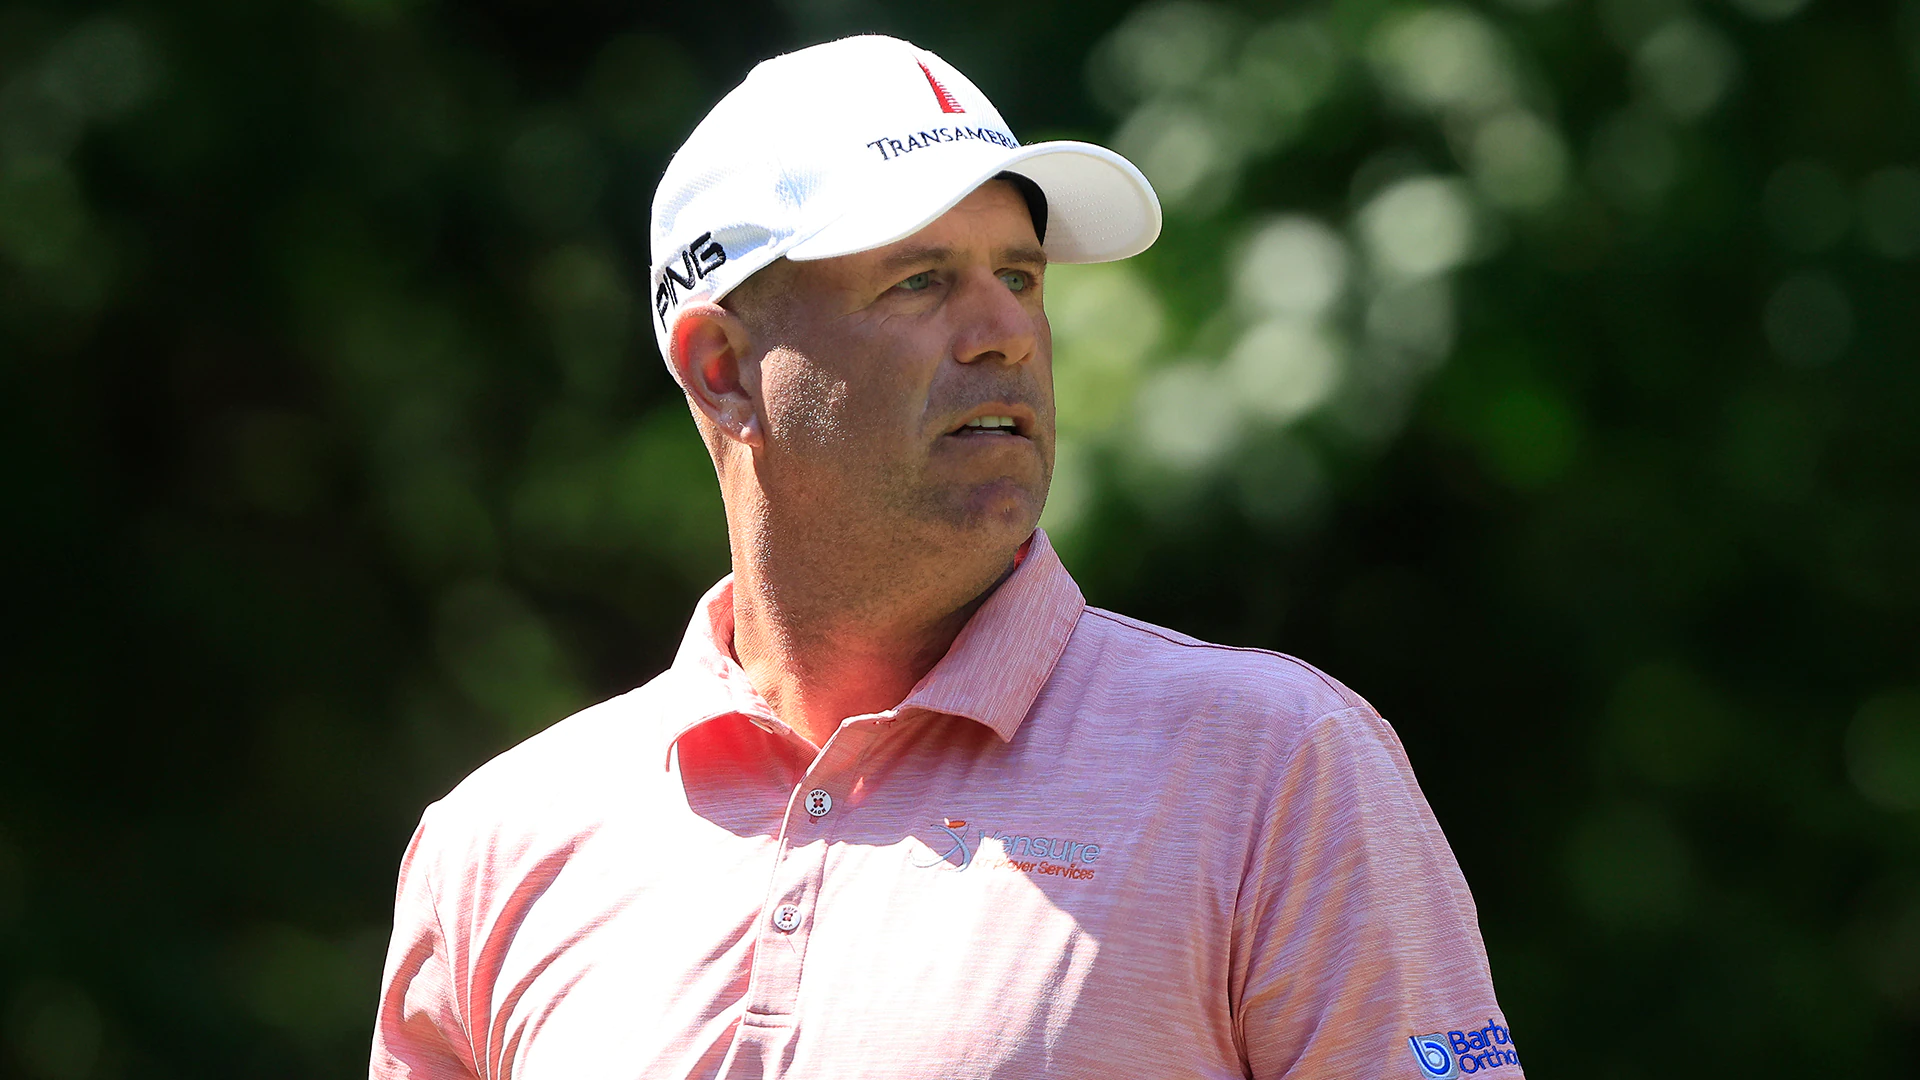 Stewart Cink back in world’s top 50 after RBC Heritage win